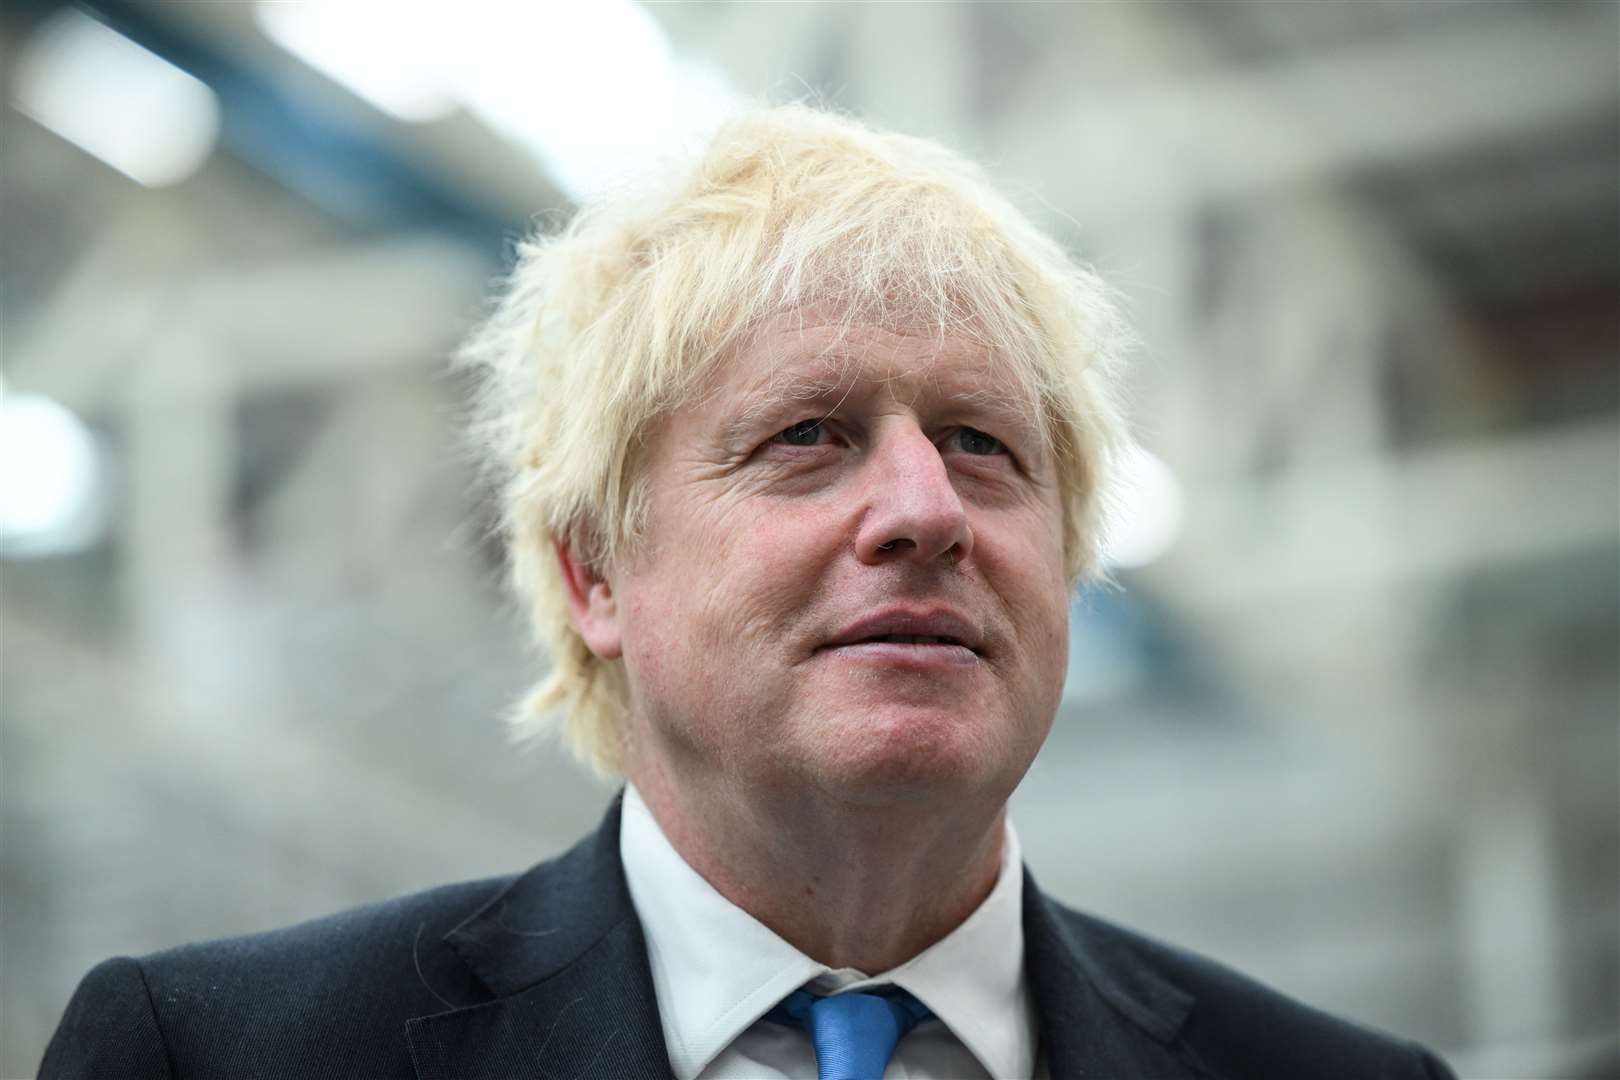 Prime Minister Boris Johnson during a visit to the Airbus UK East Factory in North Wales on August 12 (Oli Scarff/PA)